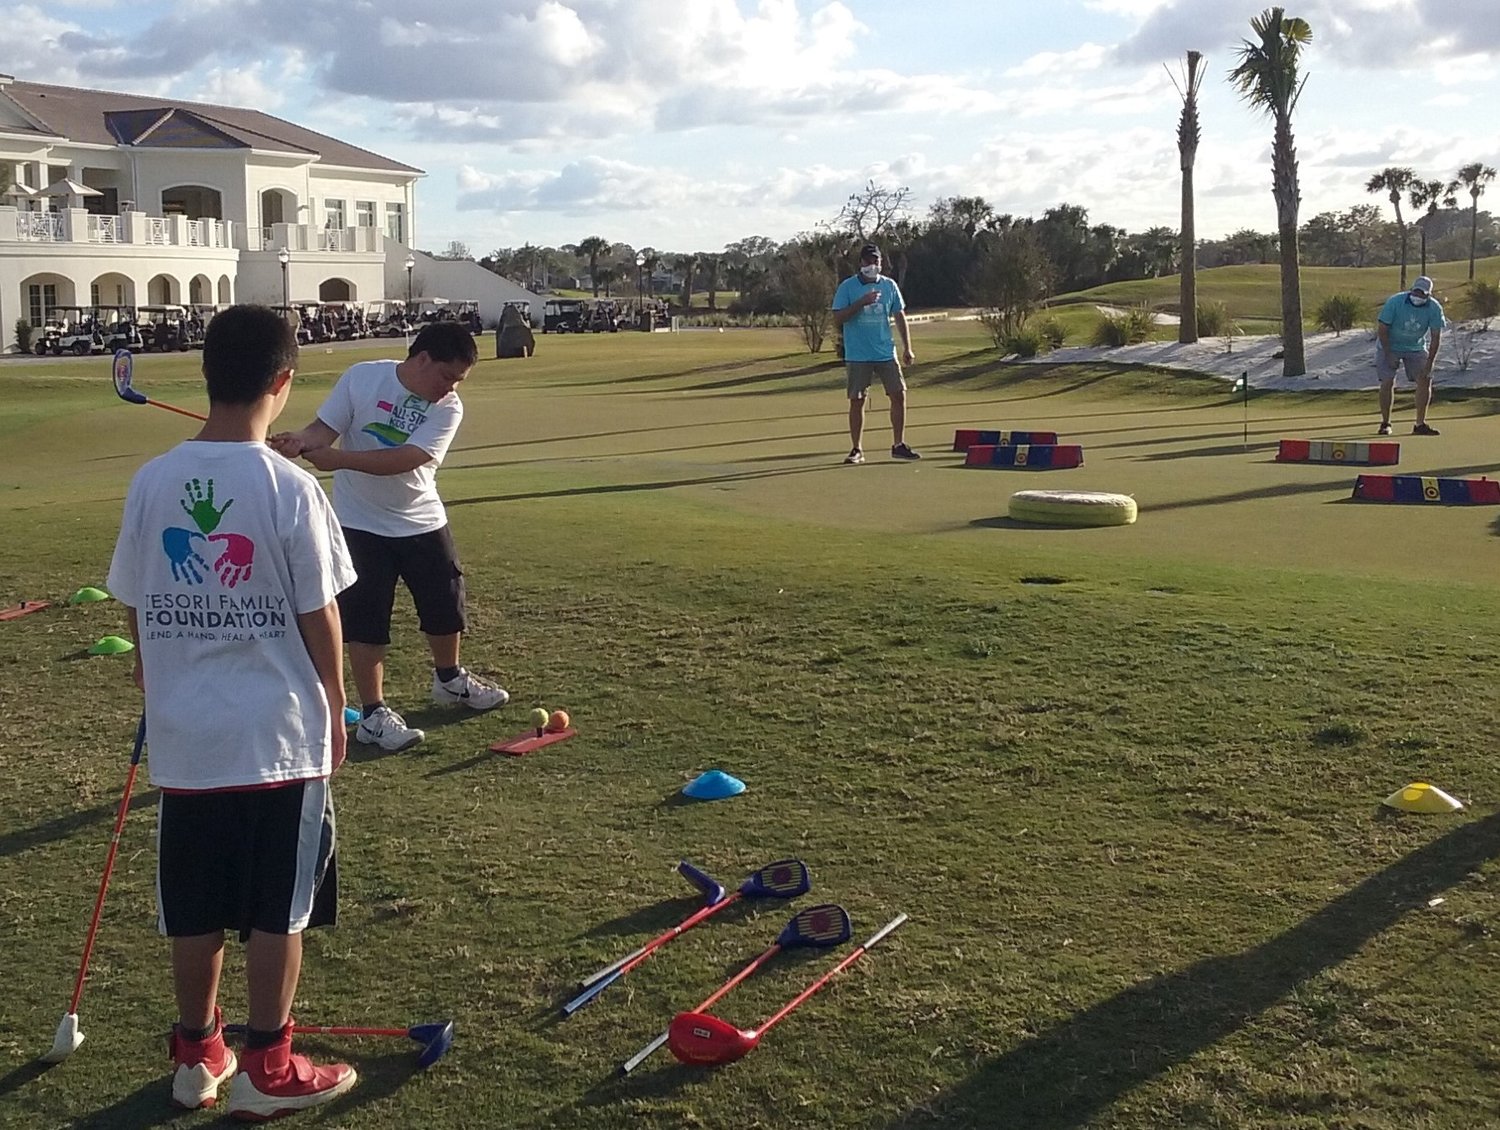 Young golfers test their chipping skills during the Tesori Family Foundation All-Star Kids Clinic on March 10.